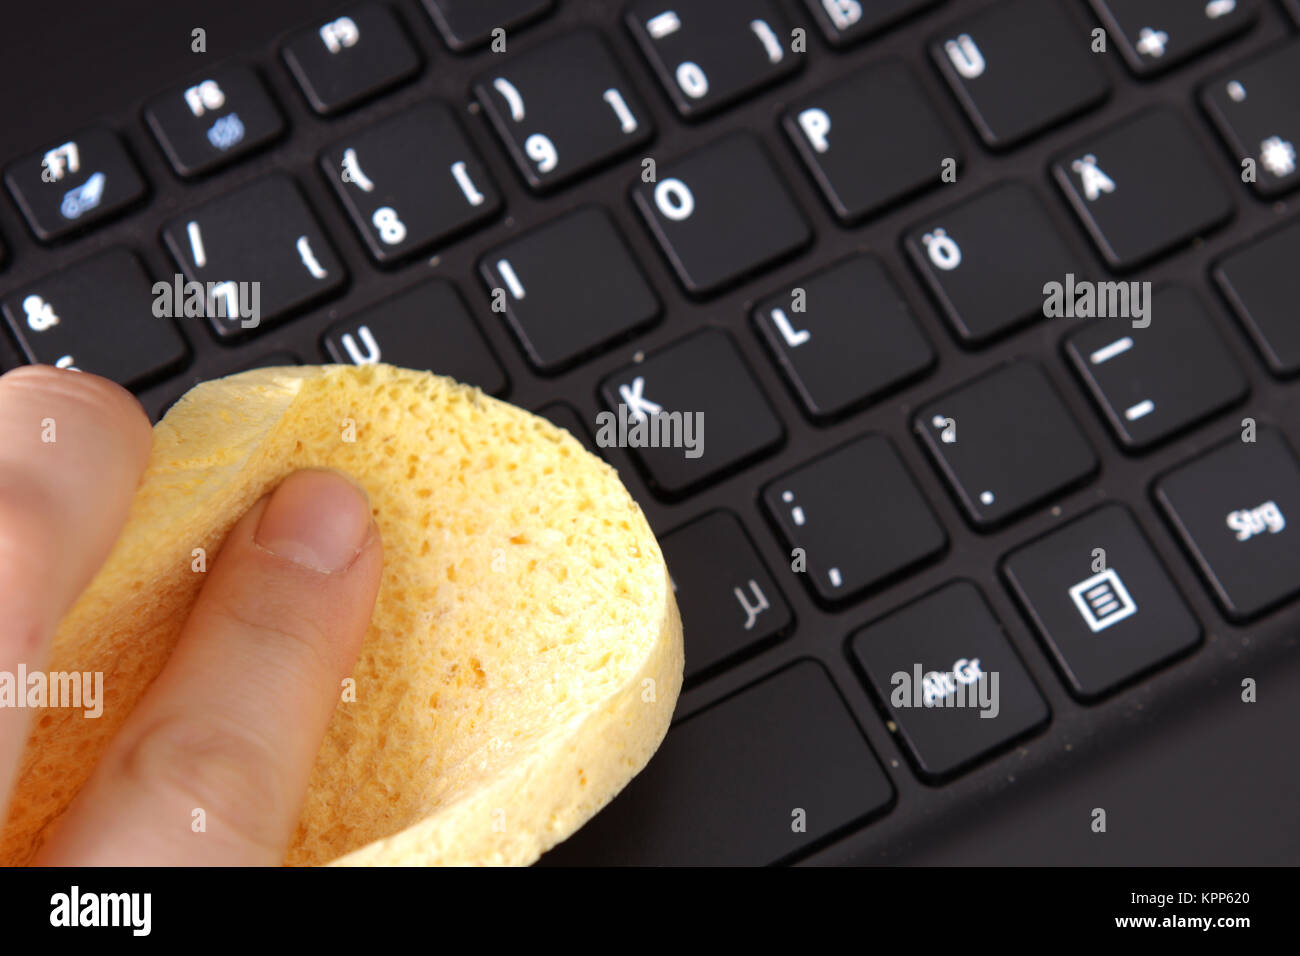 Cleaning a keyboard in the office with a sponge Stock Photo